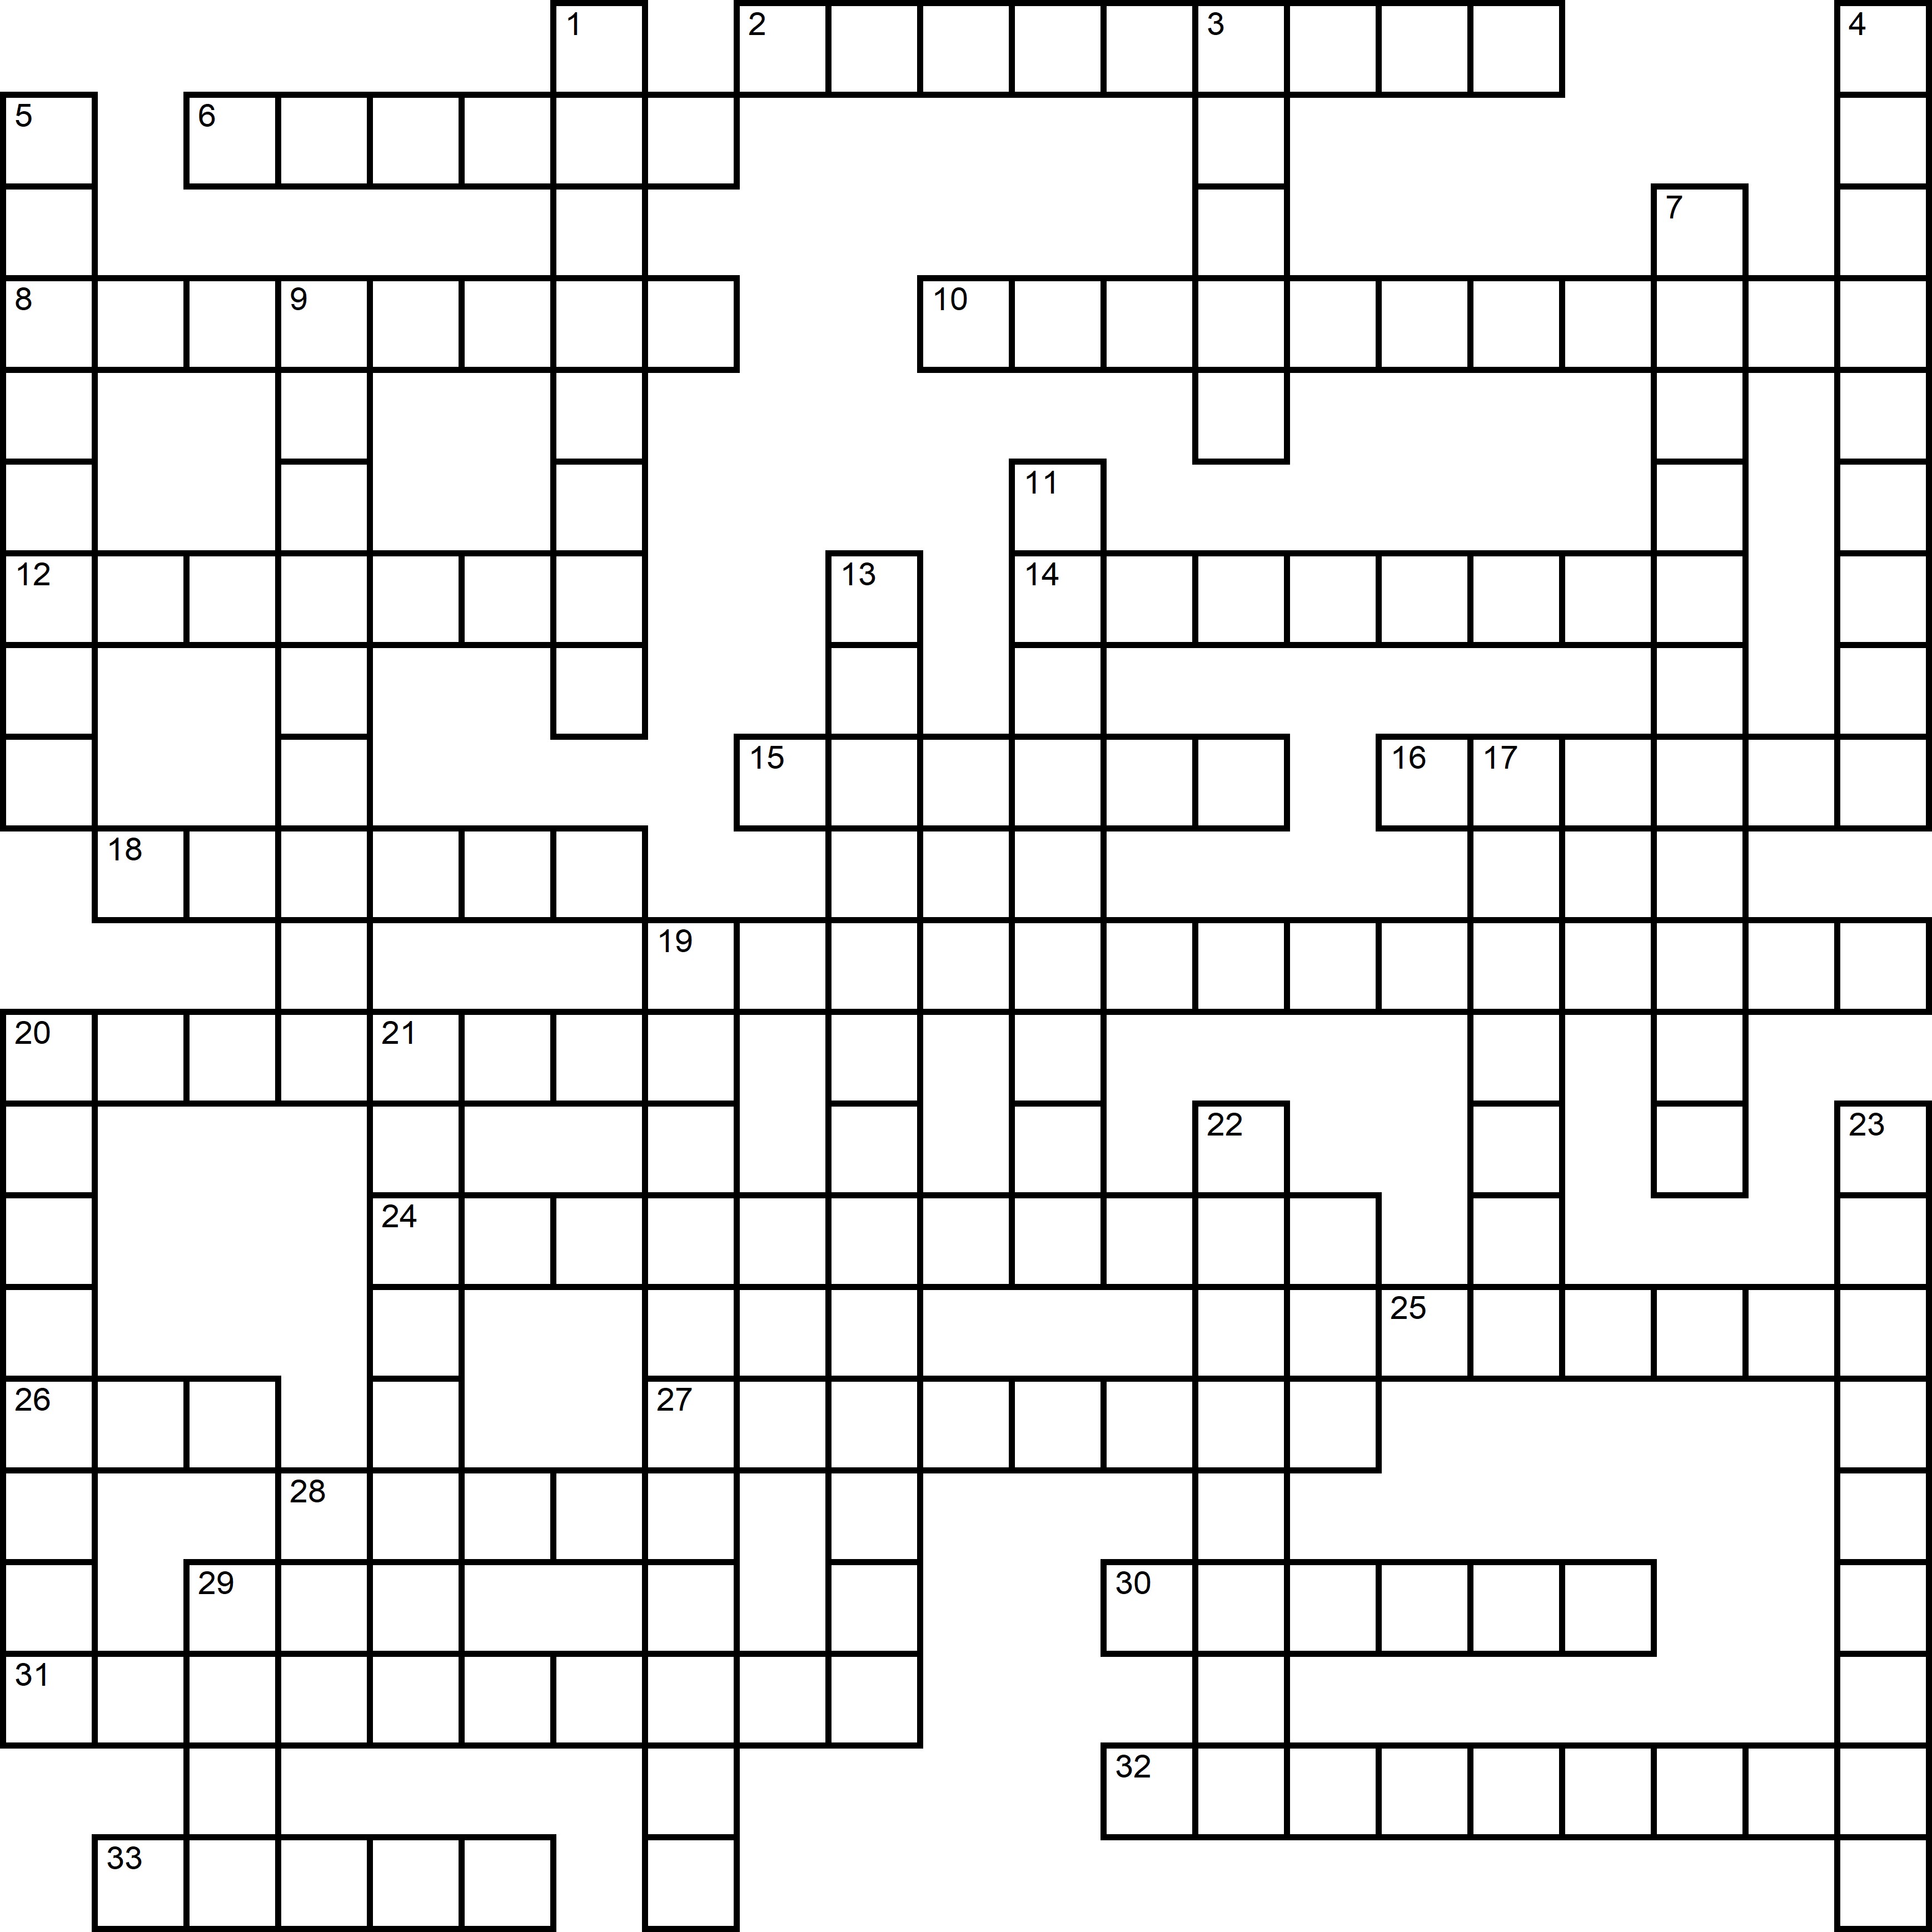 Easy Crossword About World Refugee Day